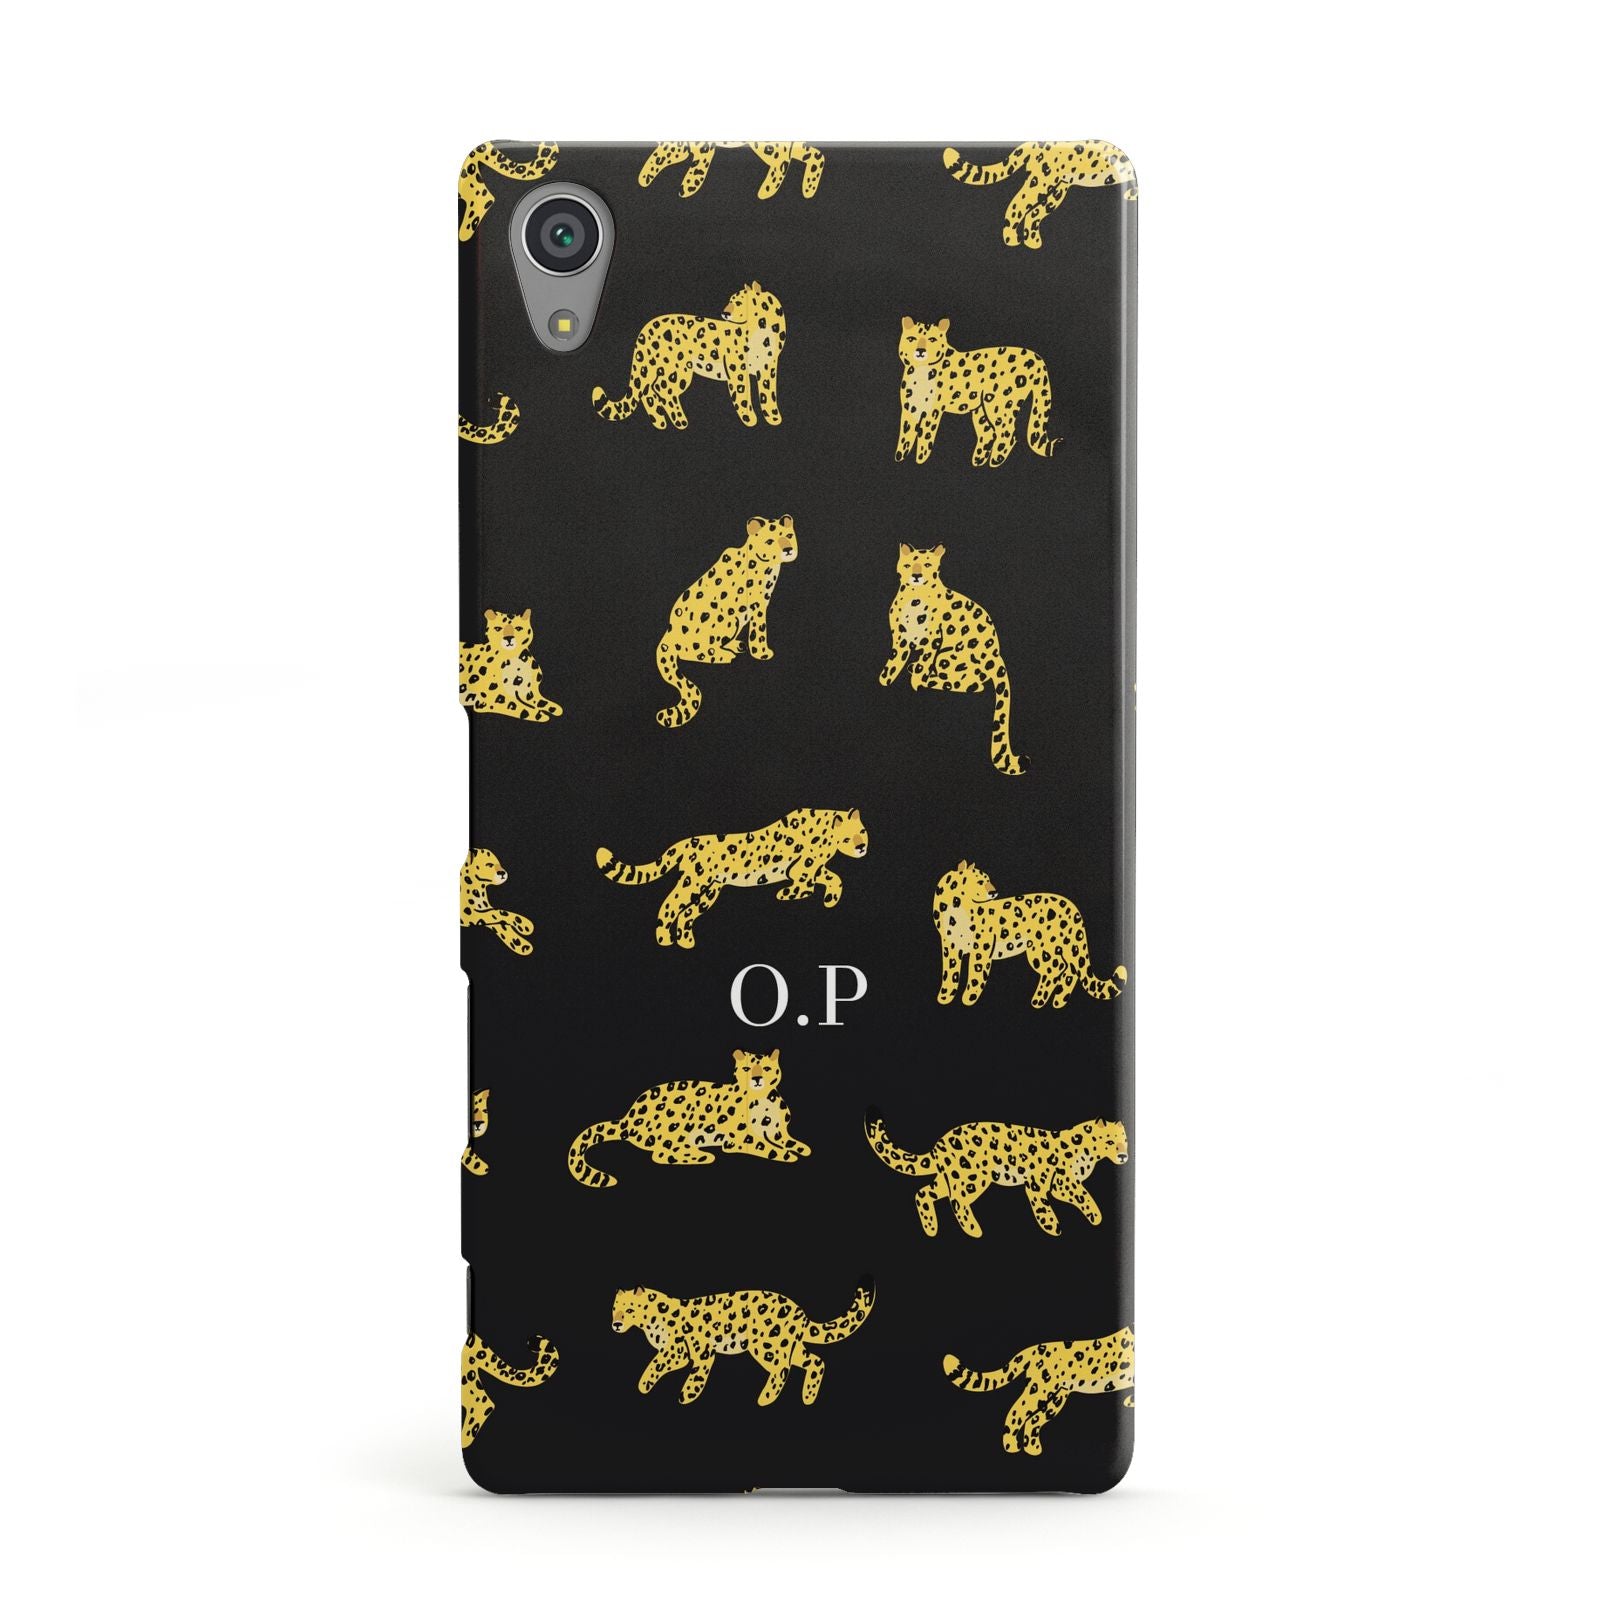 Prowling Leopard Sony Xperia Case